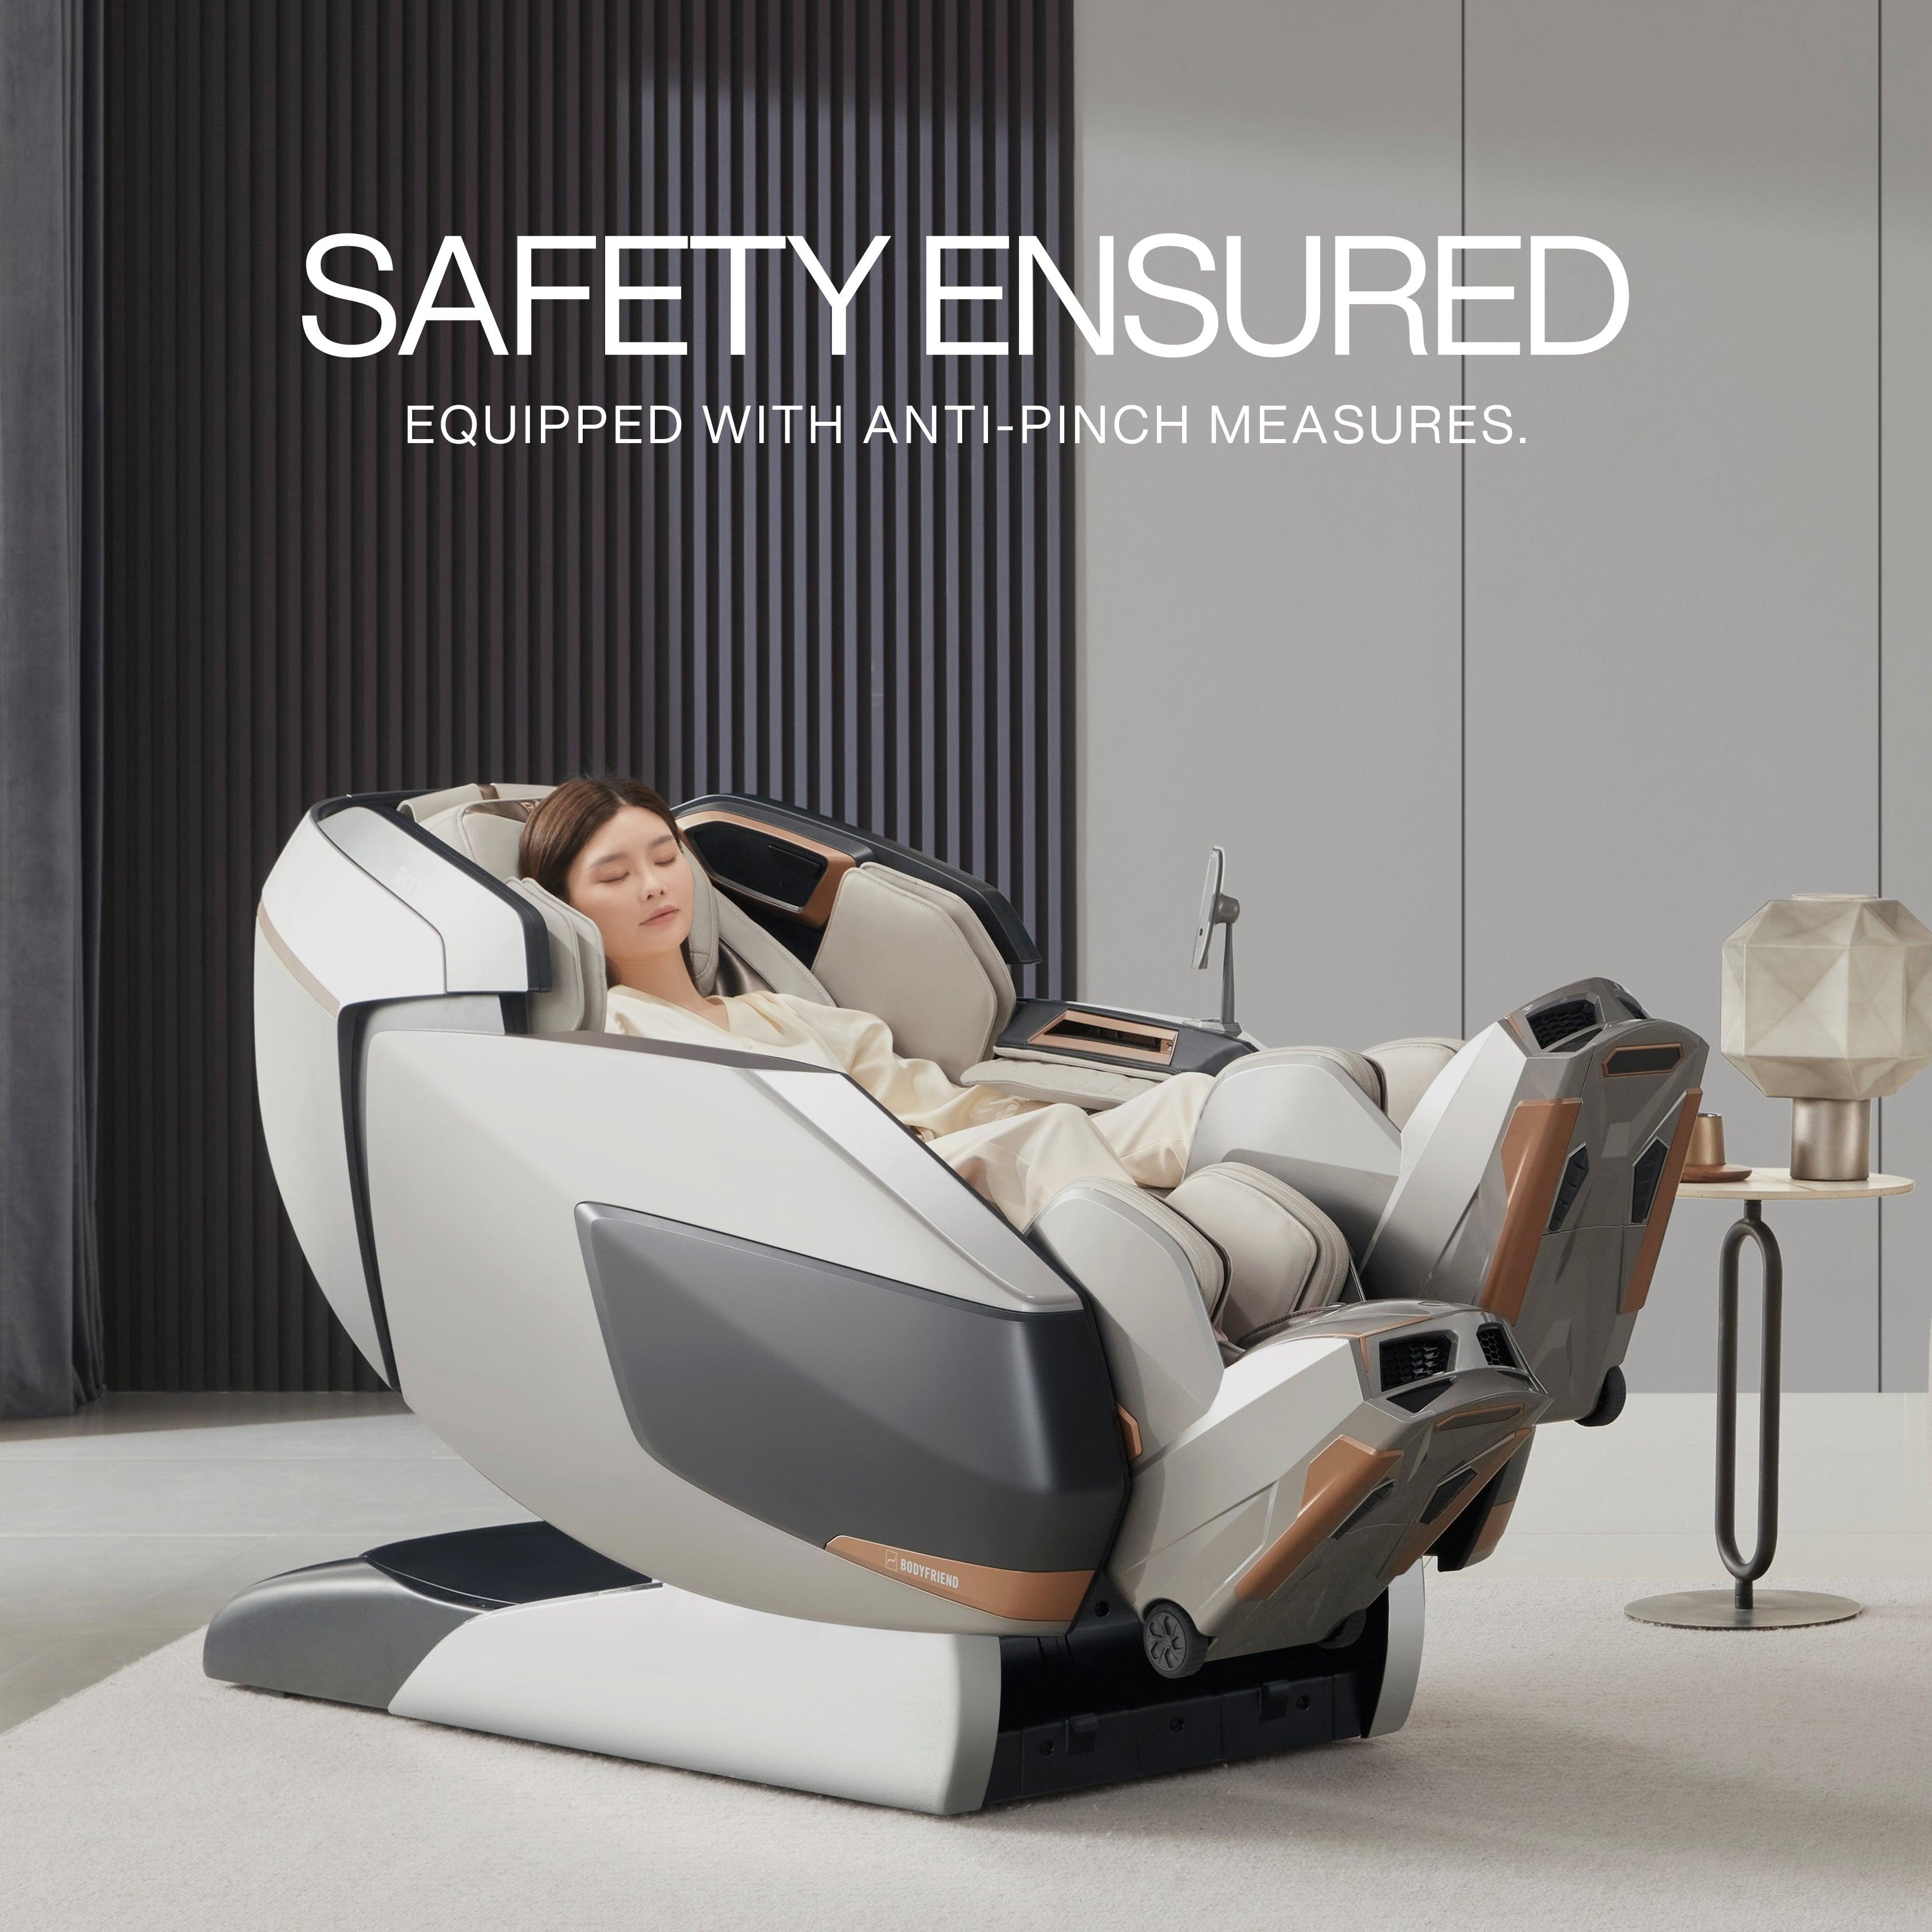 AI robotic massage chair in glacier silver providing a relaxing massage, equipped with anti-pinch safety measures